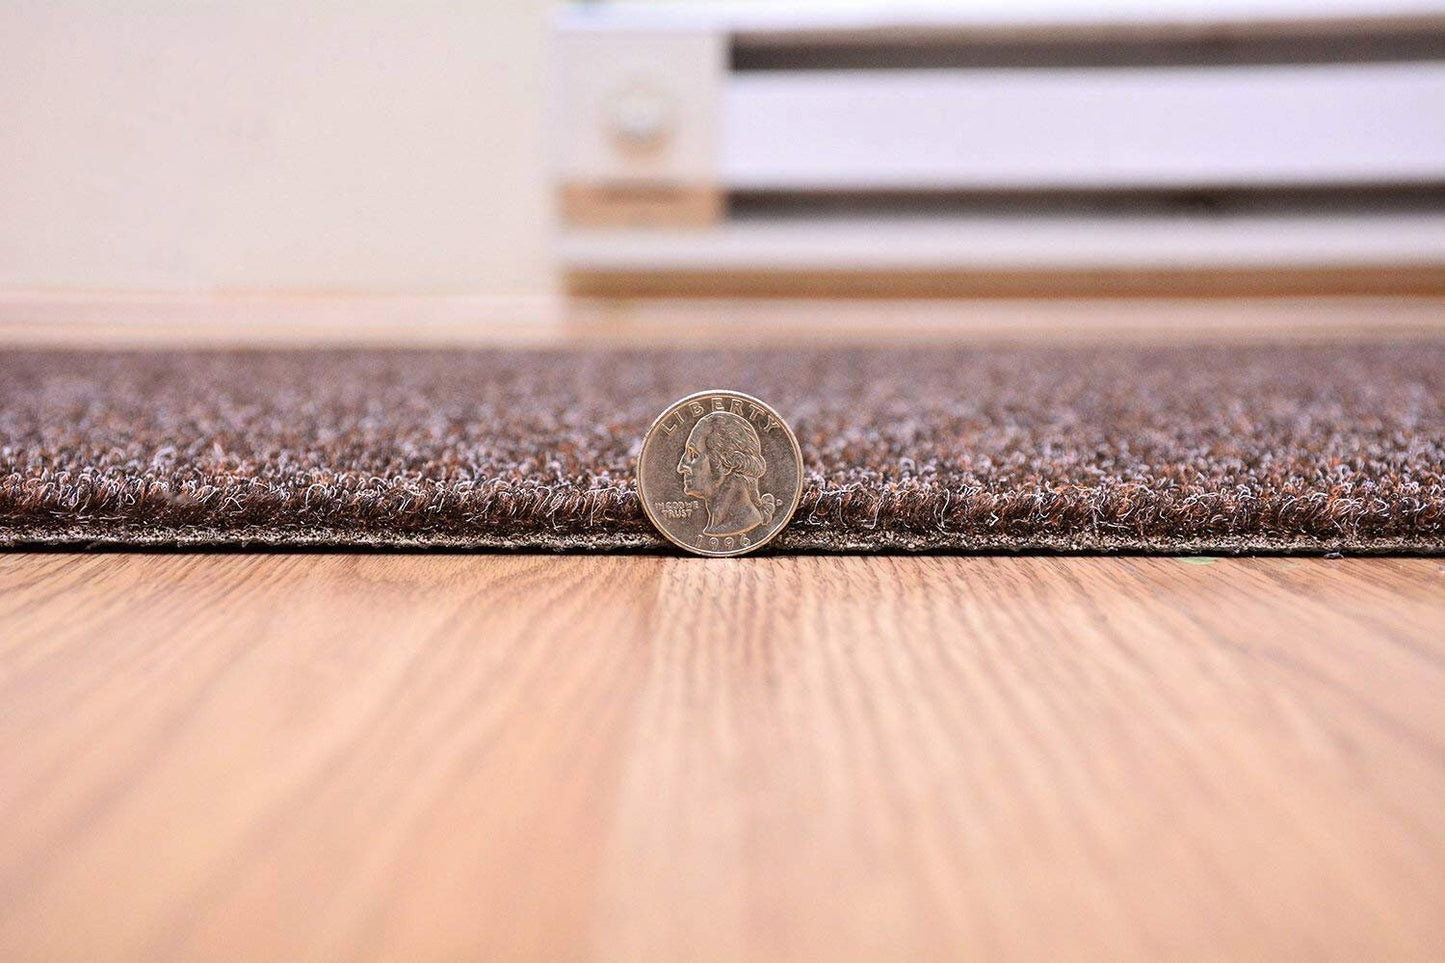 Custom Size Runner Rug Tough Collection Brown Skid Resistant Indoor / Outdoor Runner Rug Cut To Size Non Slip Runner Rug Customize By Feet